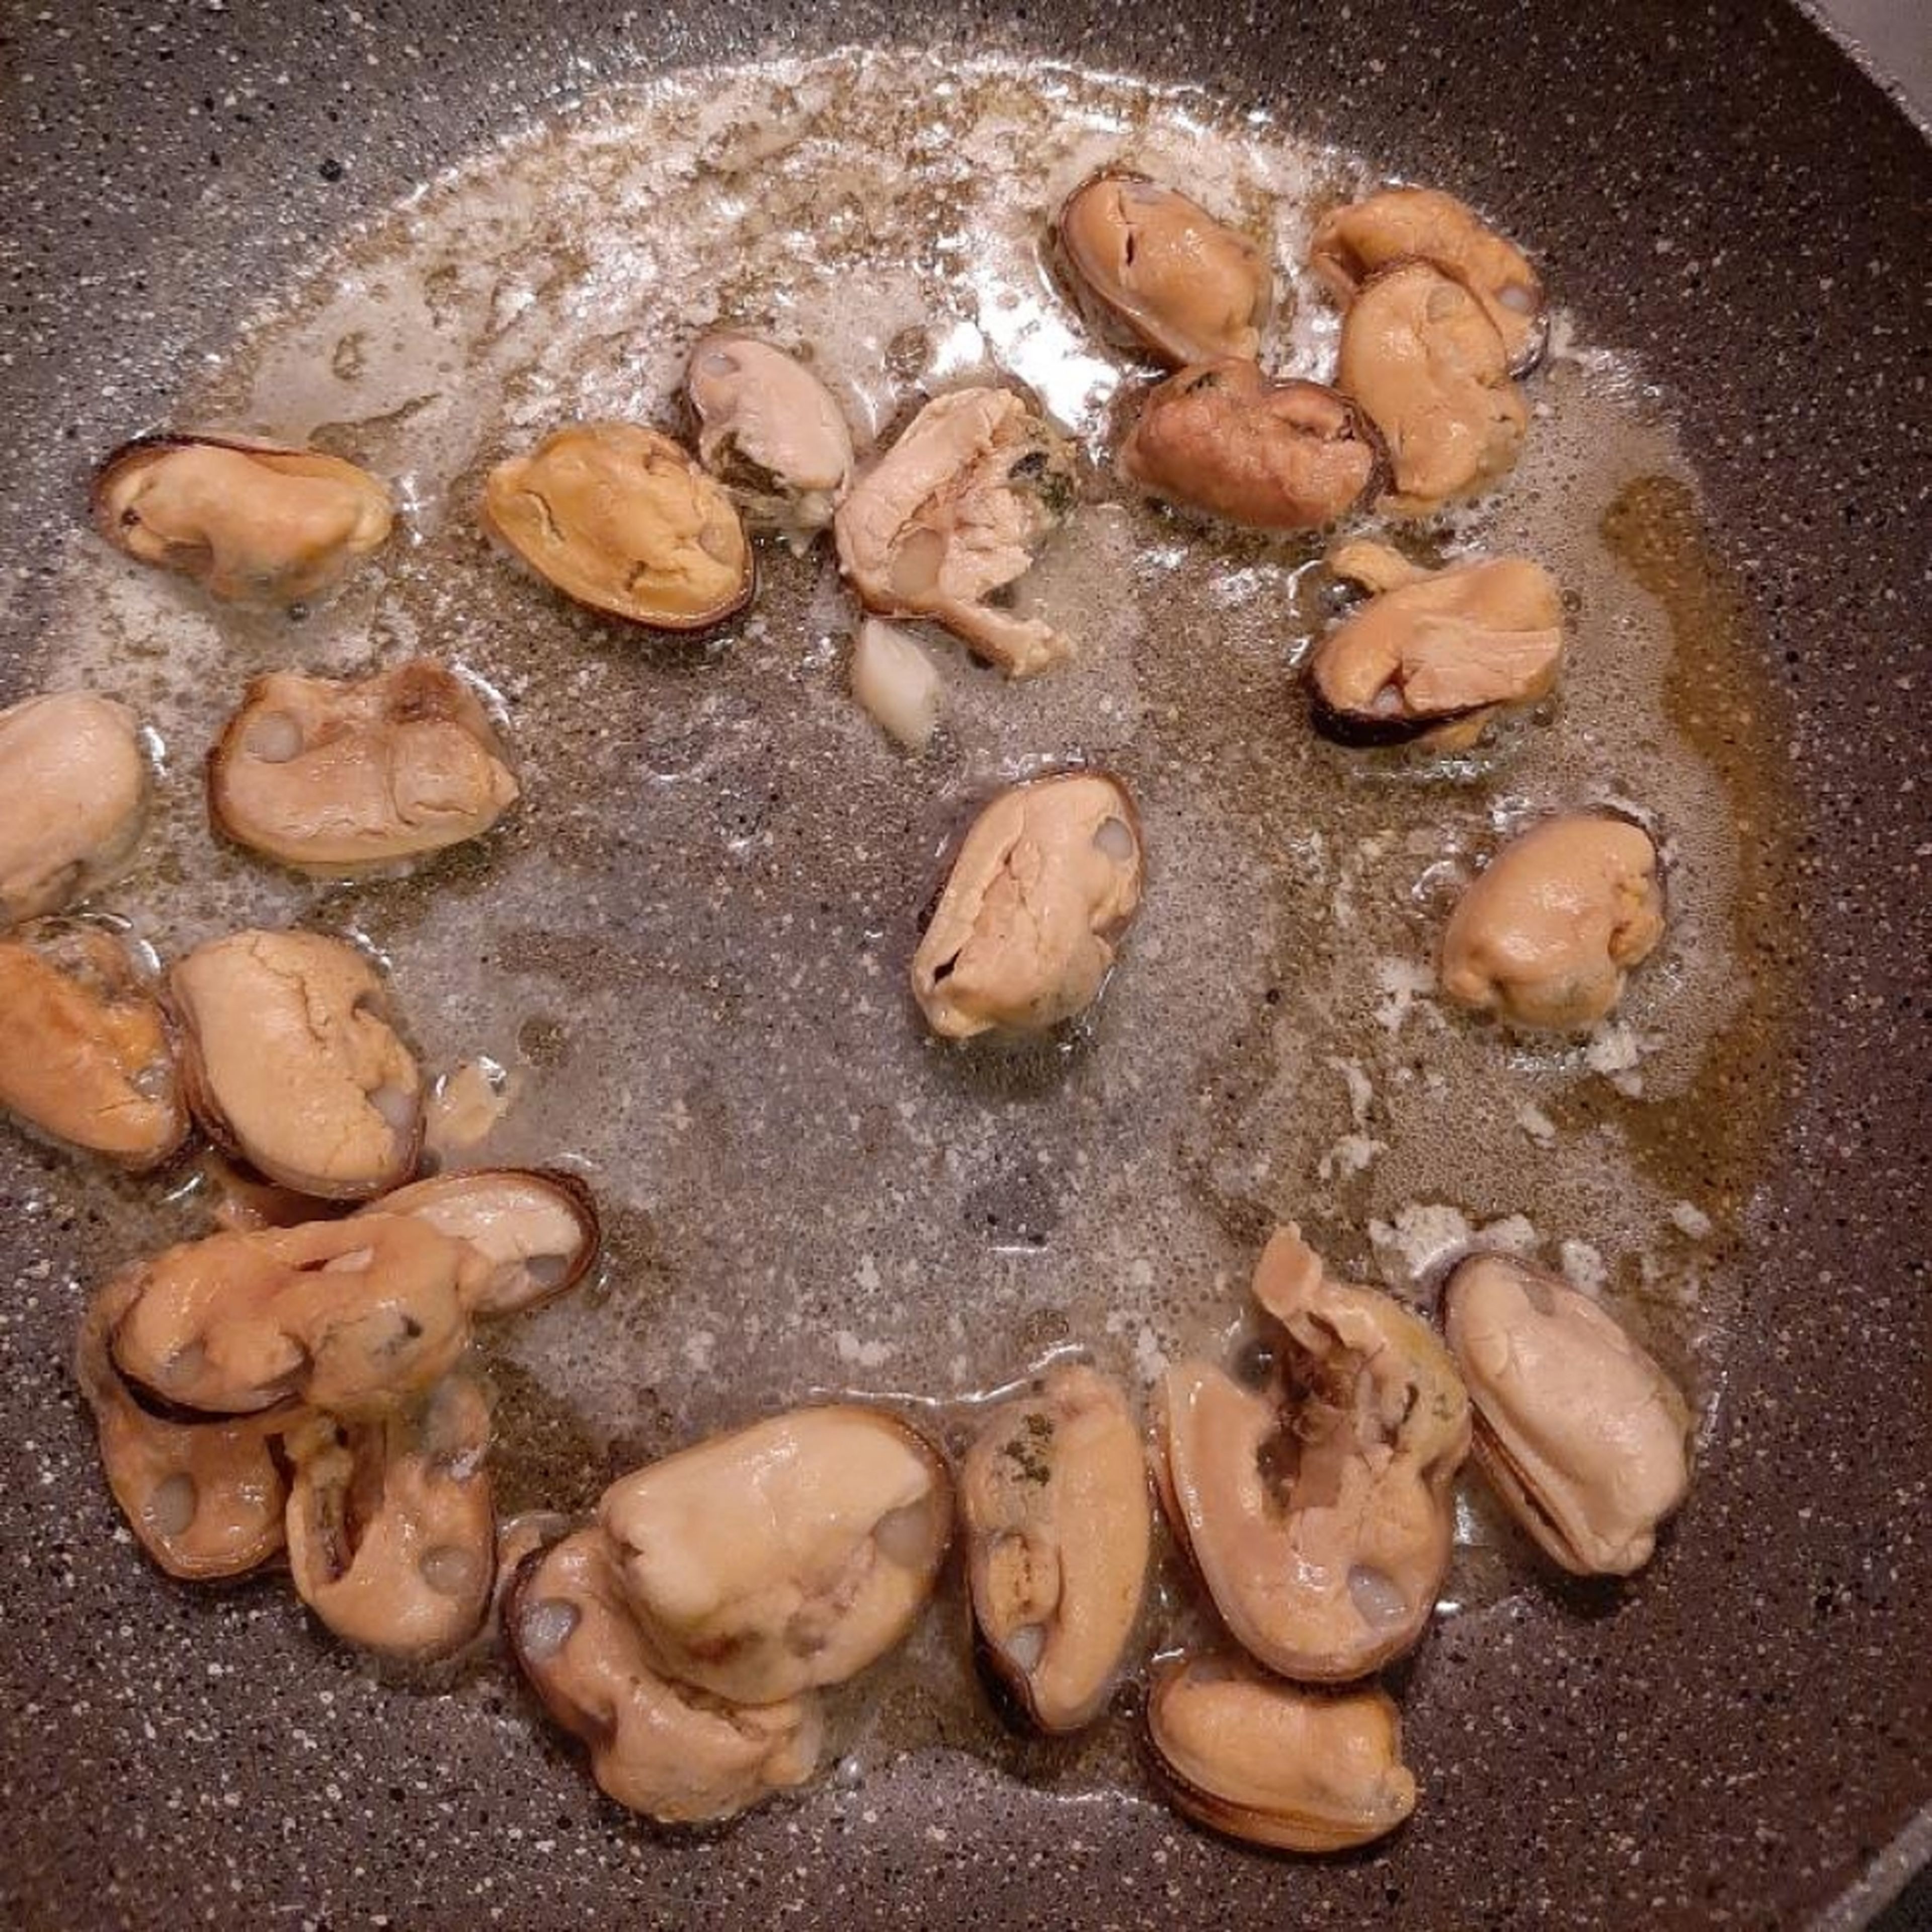 Put butter in the pan Then just take the mussels and place them in the pan